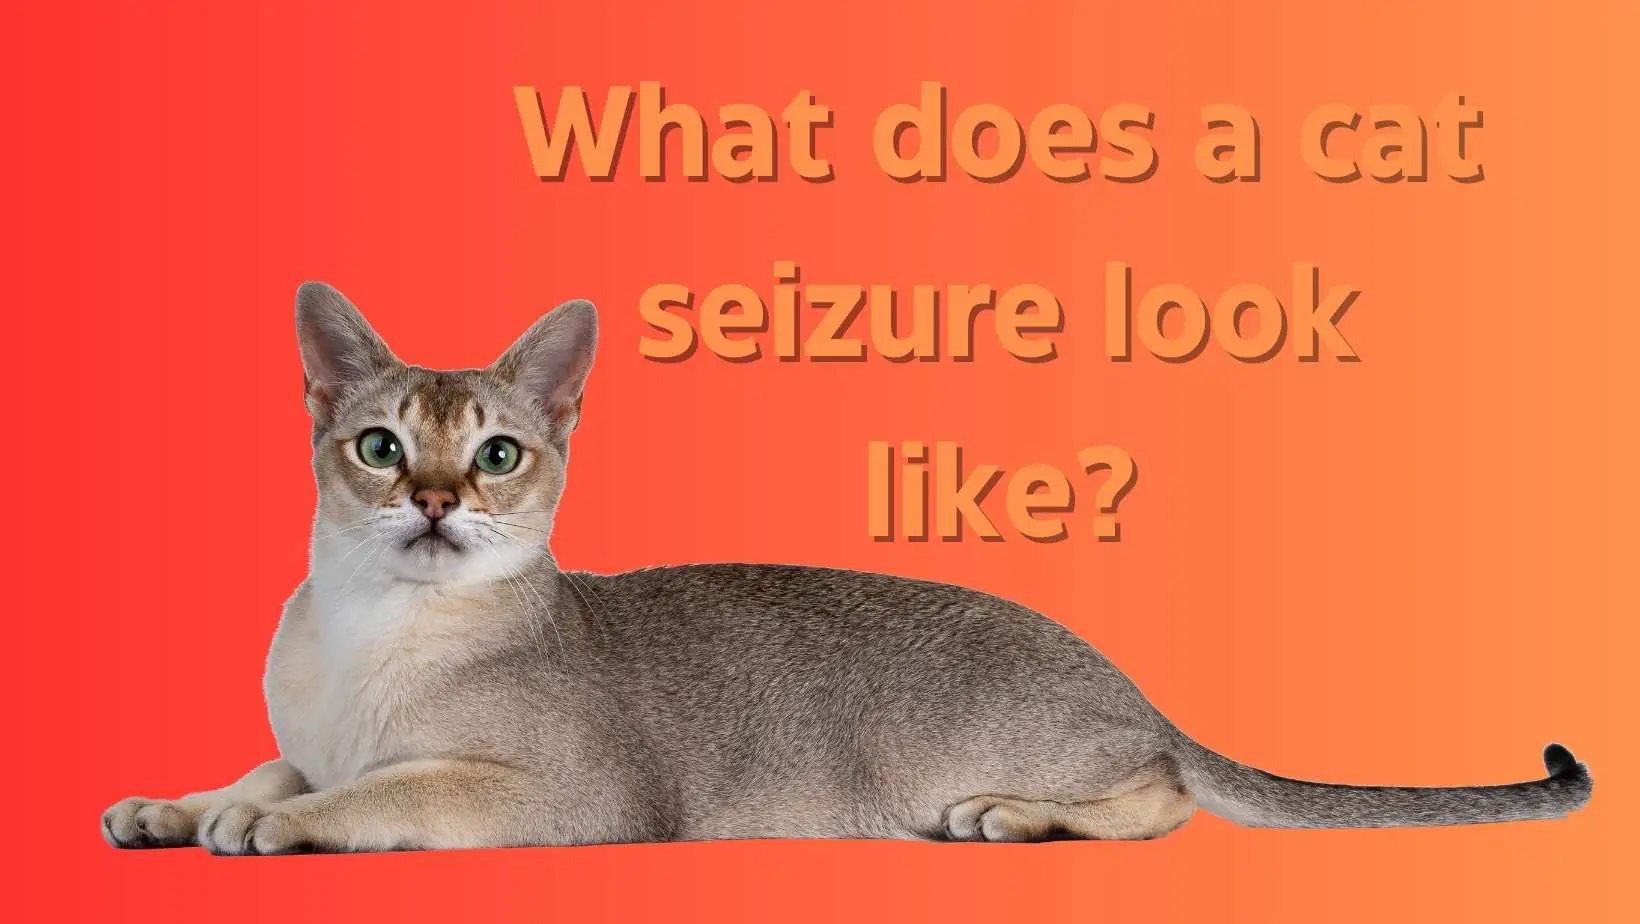 What does a cat seizure look like?